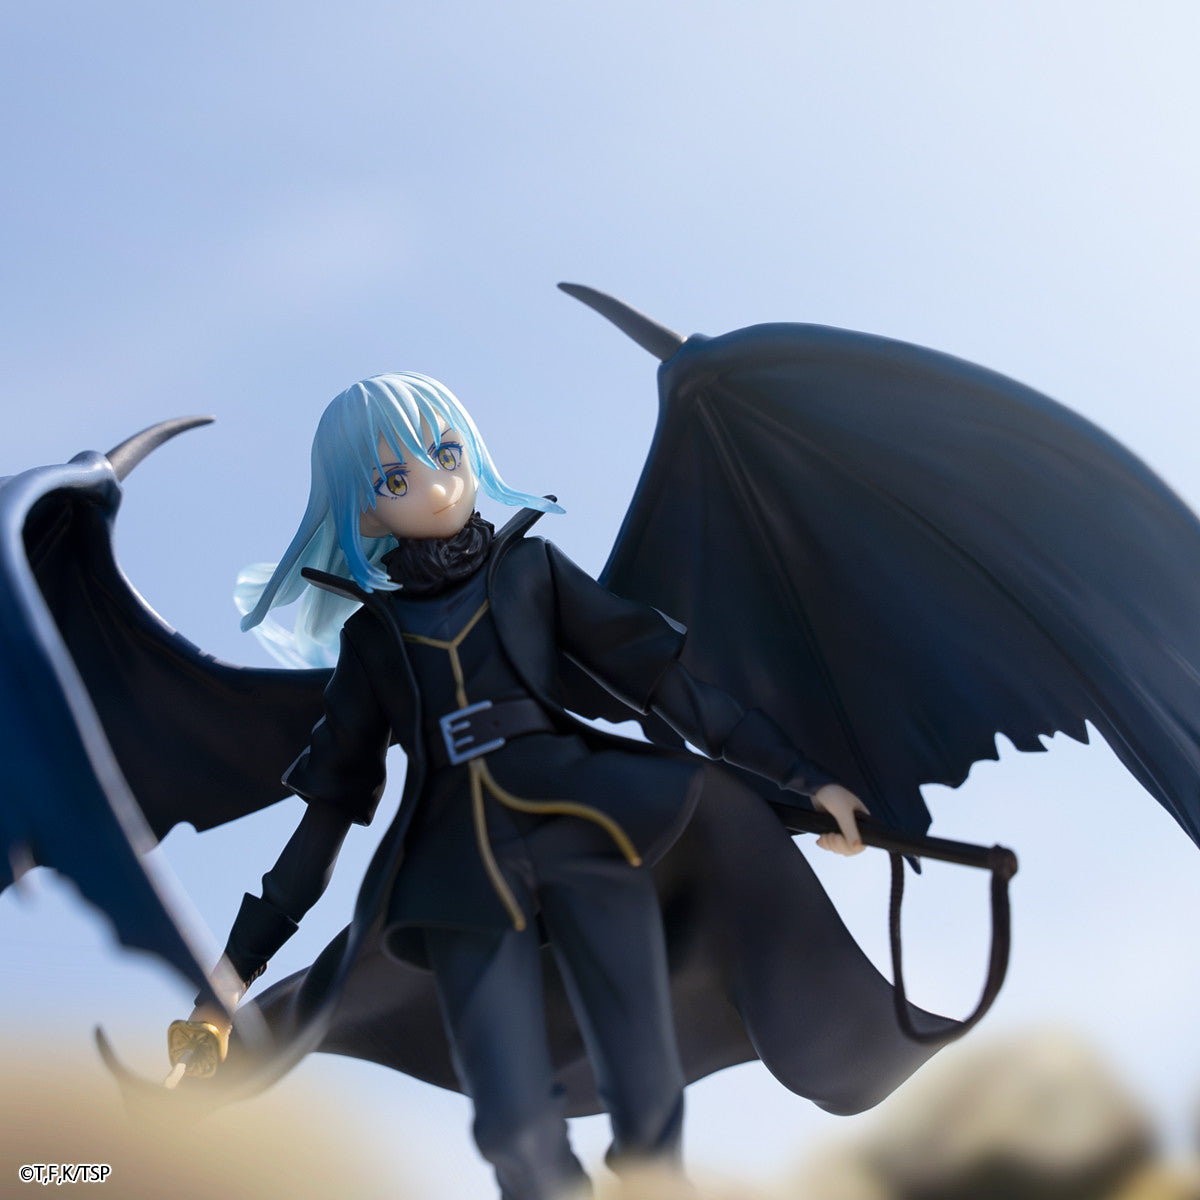 That Time I Got Reincarnated As A Slime - Rimuru Tempest - Ichiban Kuji That Time I Got Reincarnated As A Slime ~Harvest Festival~ - A Prize (Bandai Spirits), Franchise: That Time I Got Reincarnated As A Slime, Brand: Bandai Spirits, Release Date: 16. Jan 2021, Type: Prize, Store Name: Nippon Figures